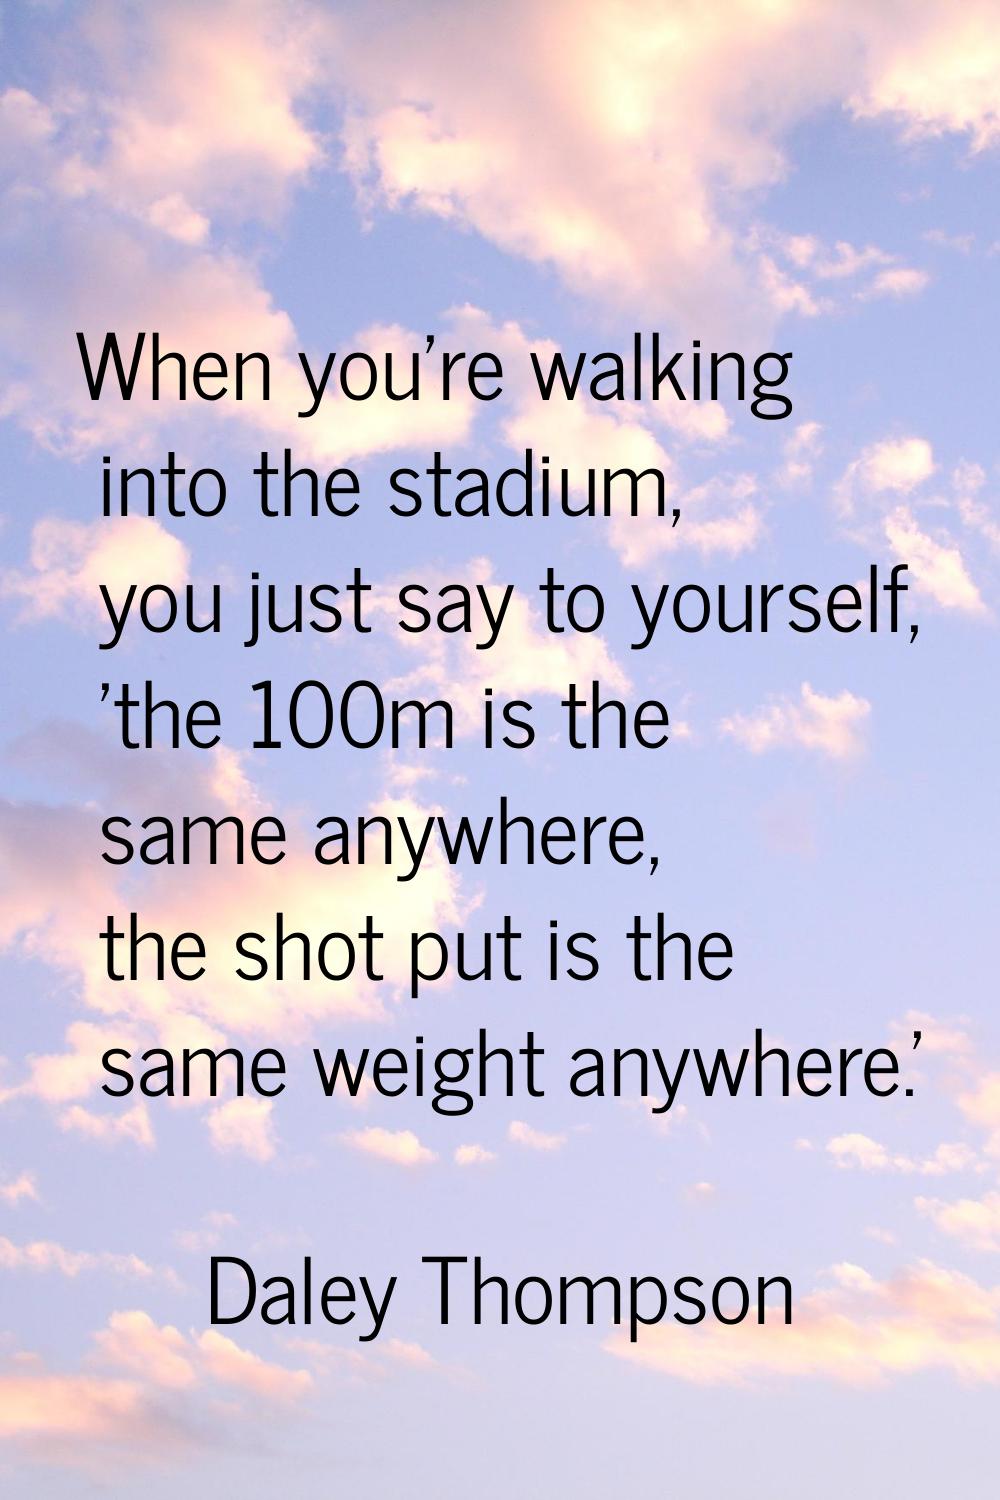 When you're walking into the stadium, you just say to yourself, 'the 100m is the same anywhere, the